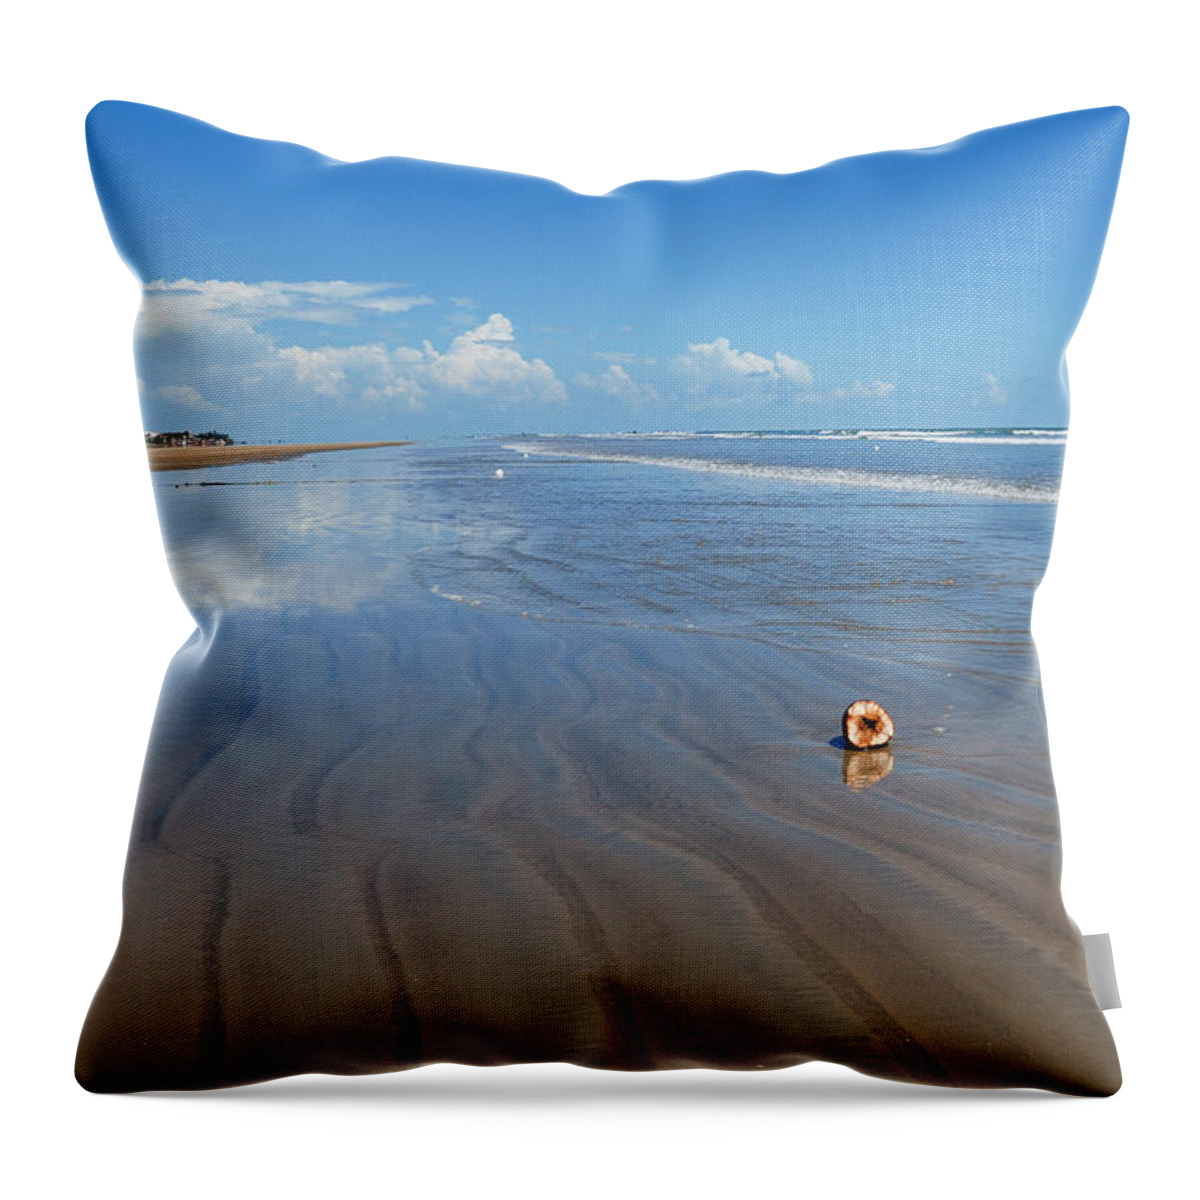 Coconut Throw Pillow featuring the photograph Tranquility by Fotosas Photography